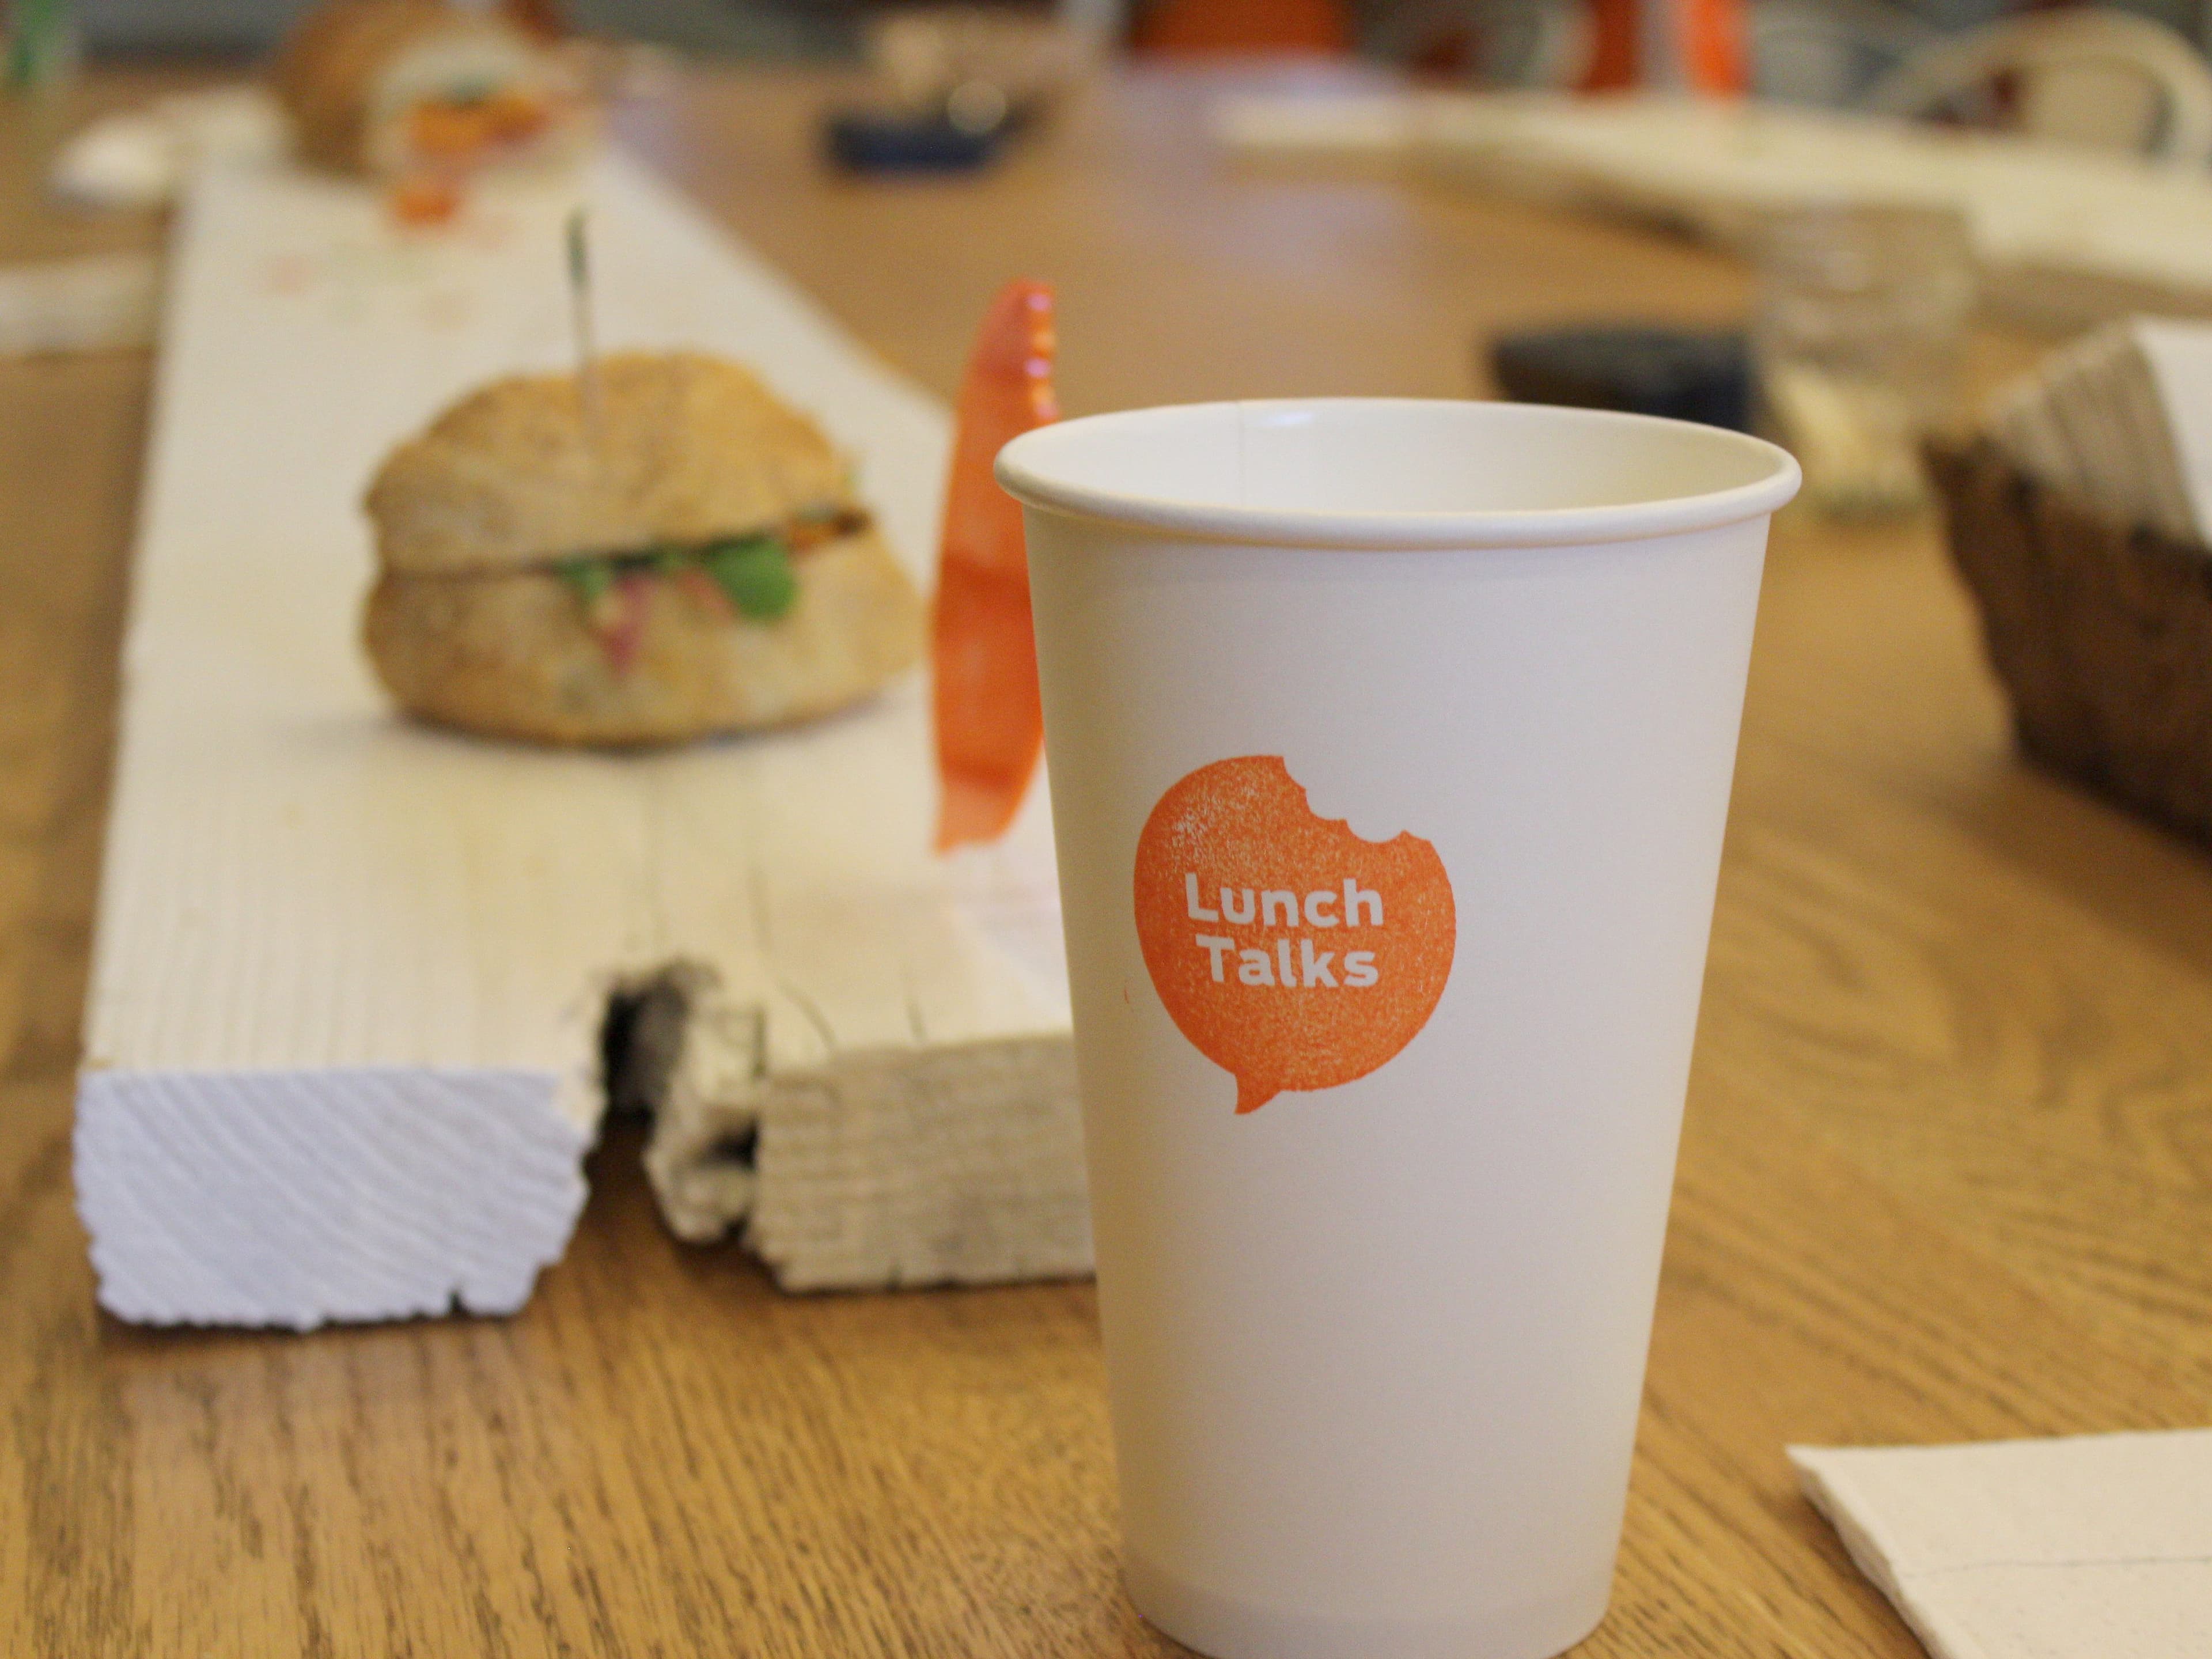 A white paper cup with an orange logo reading "Lunch Talks" sits on a wooden table. In the background, there is a sandwich on a white plank and a small plastic orange dinosaur toy, slightly out of focus. The setting suggests an informal gathering or discussion over lunch.